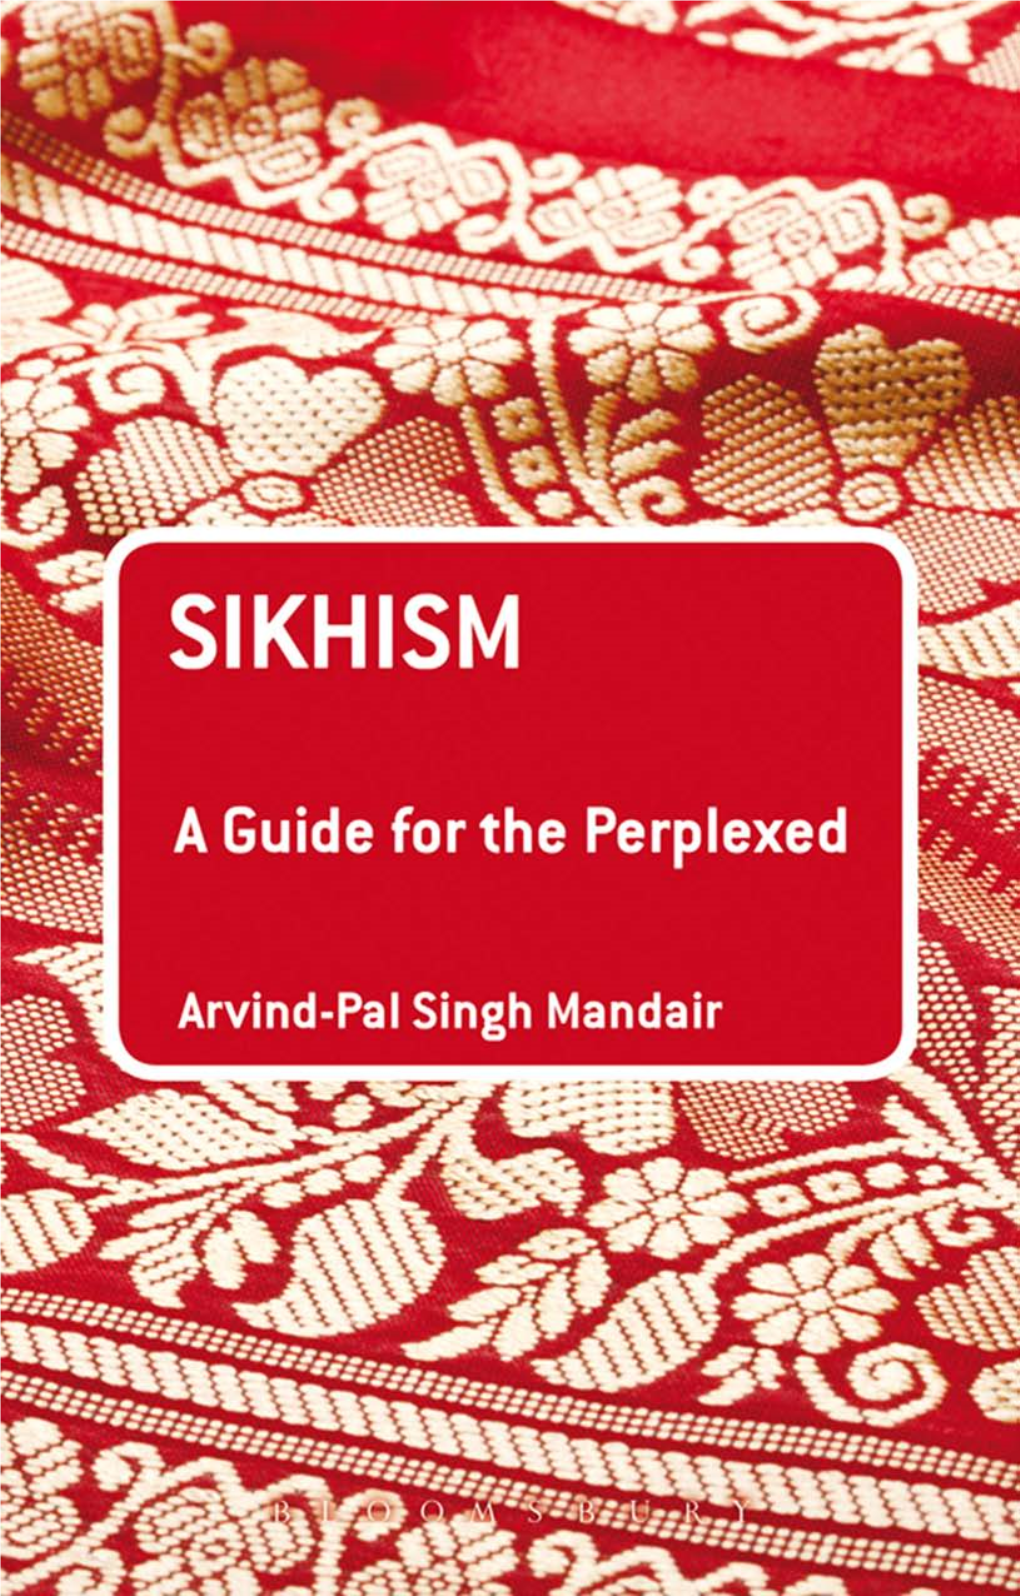 Sikhism GUIDES for the PERPLEXED